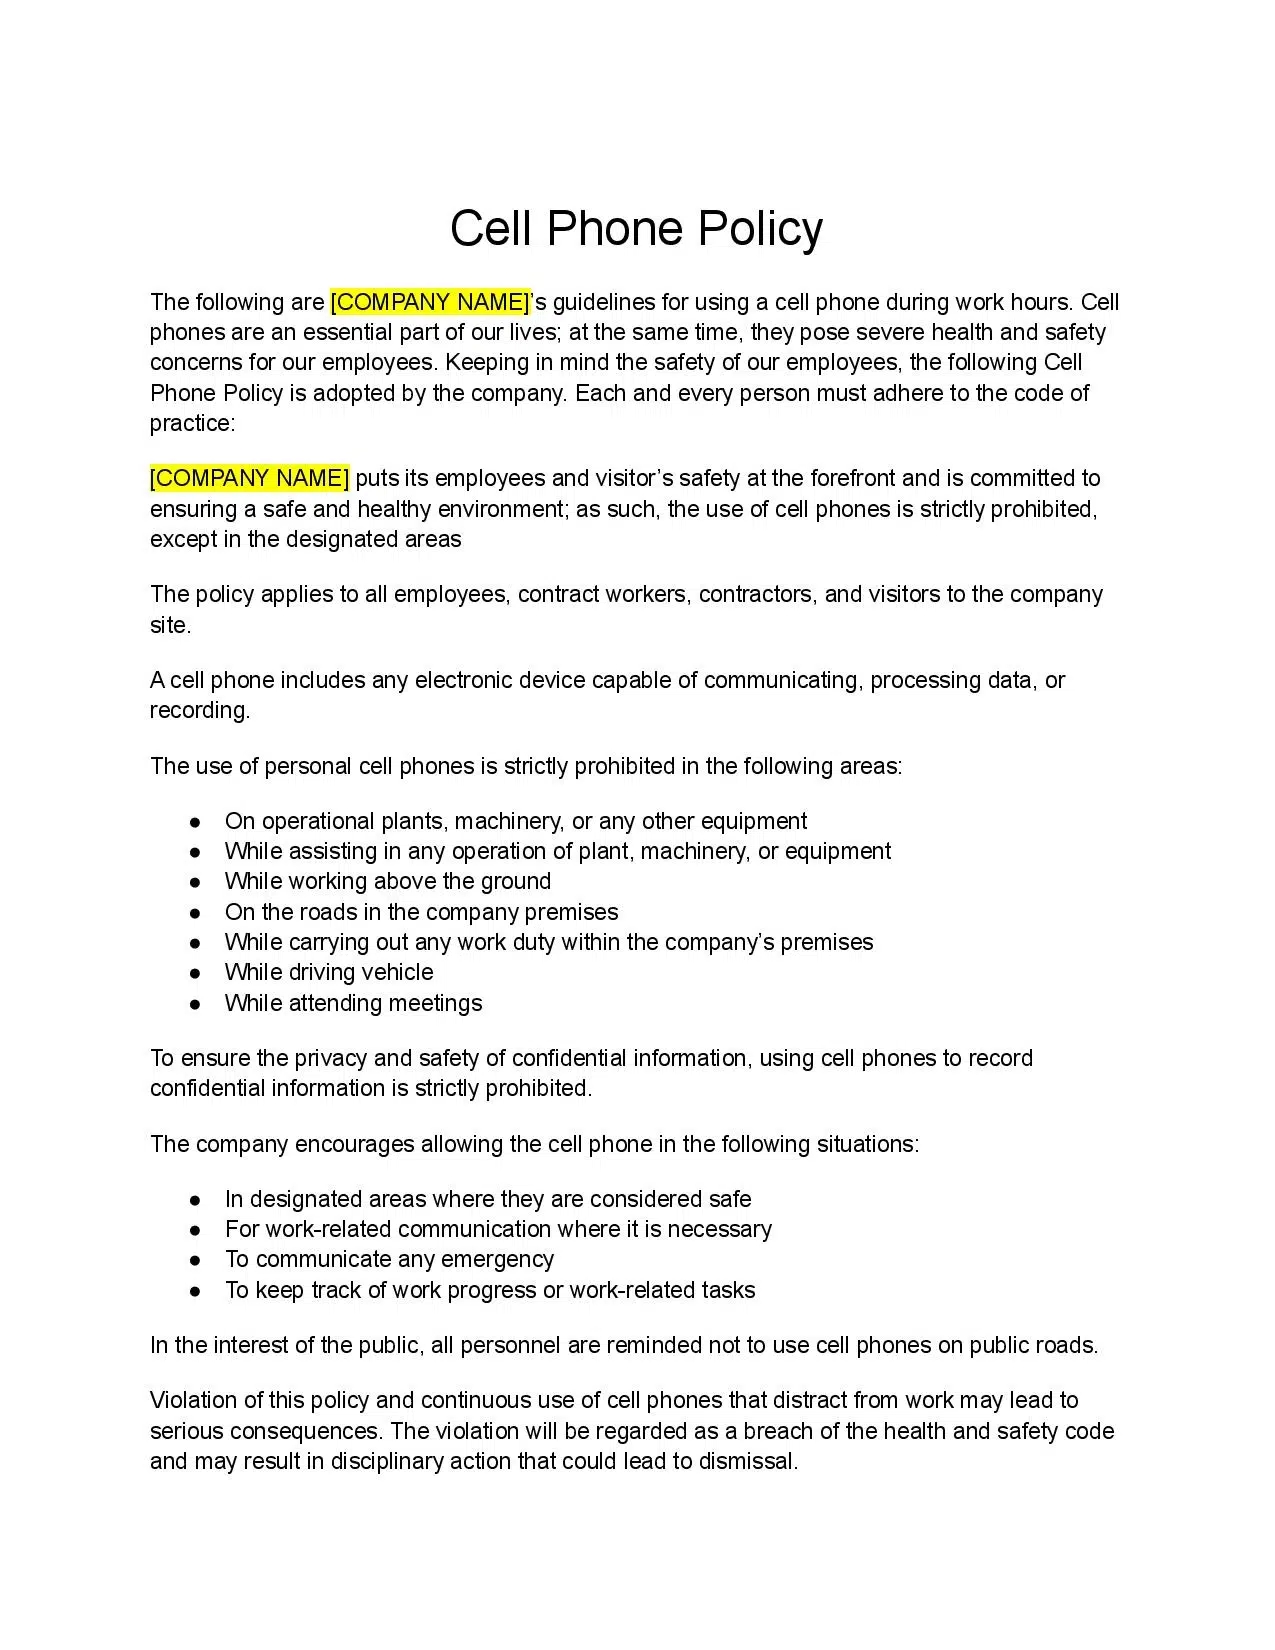 cell phone policy essay